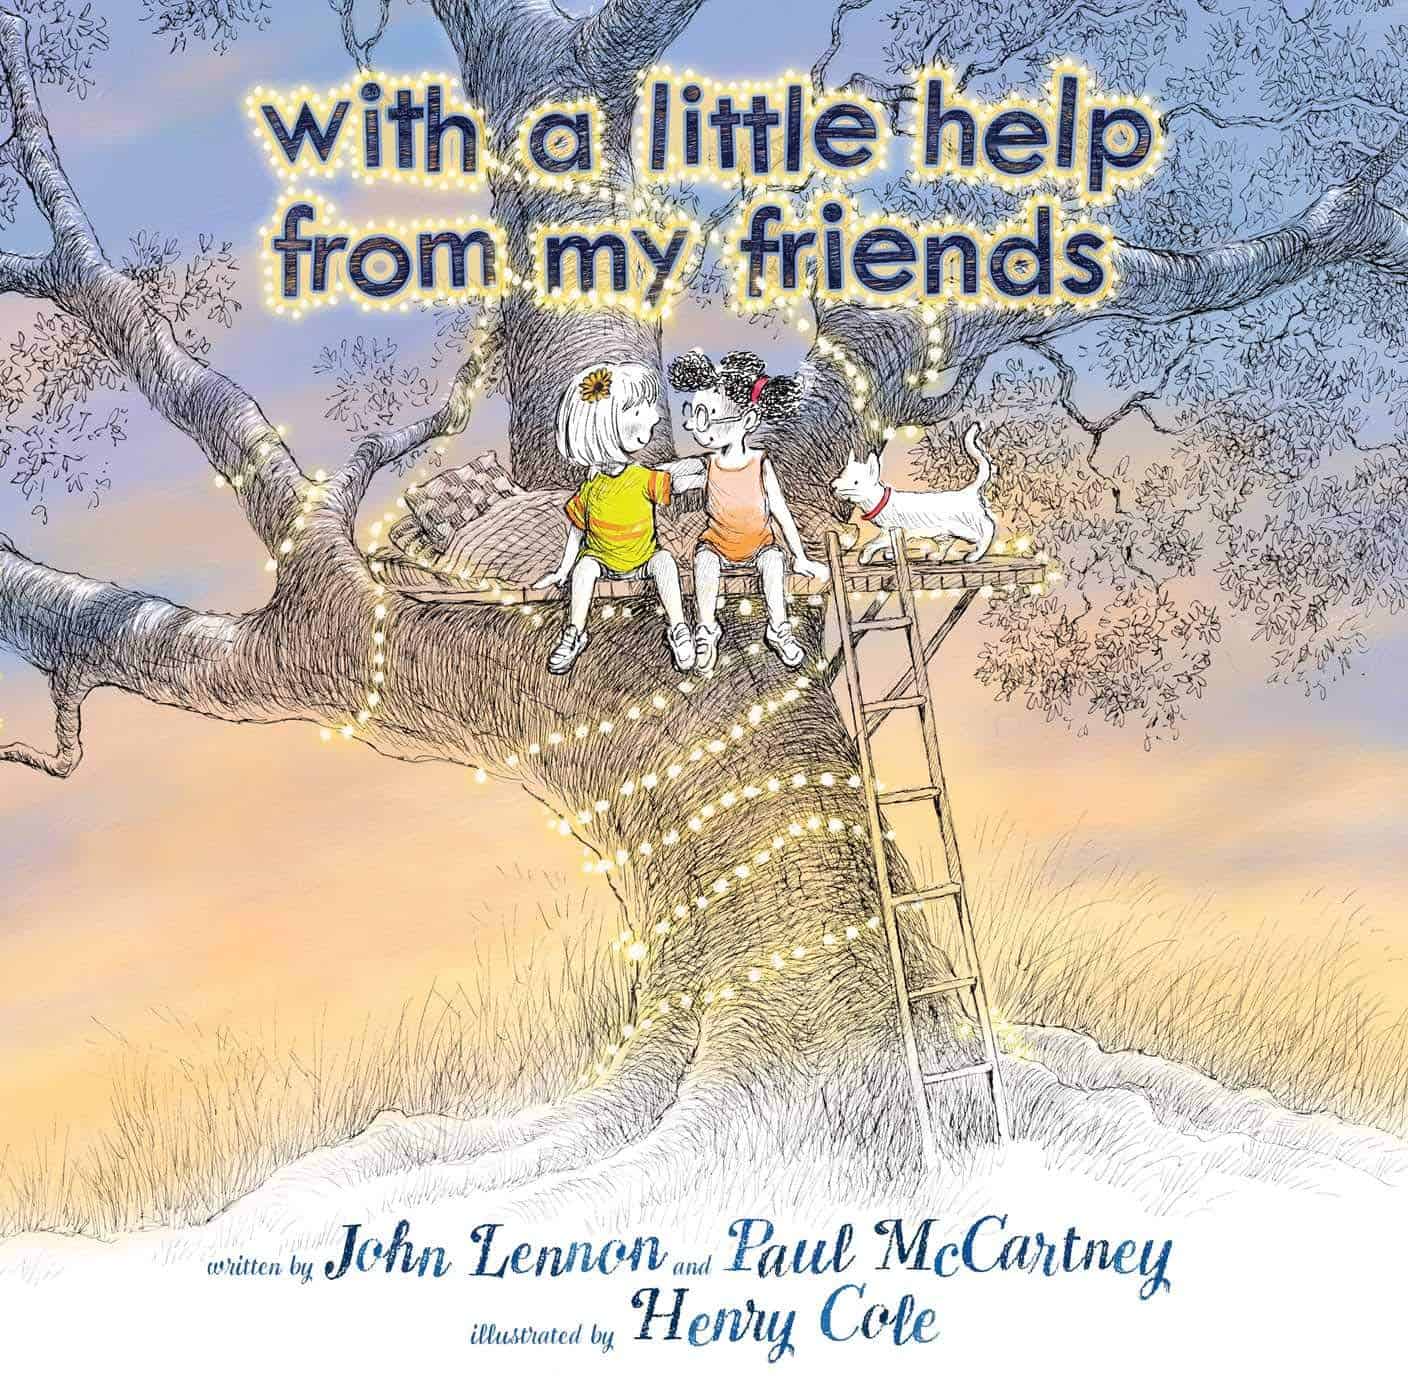 with-a-little-help-friends-book